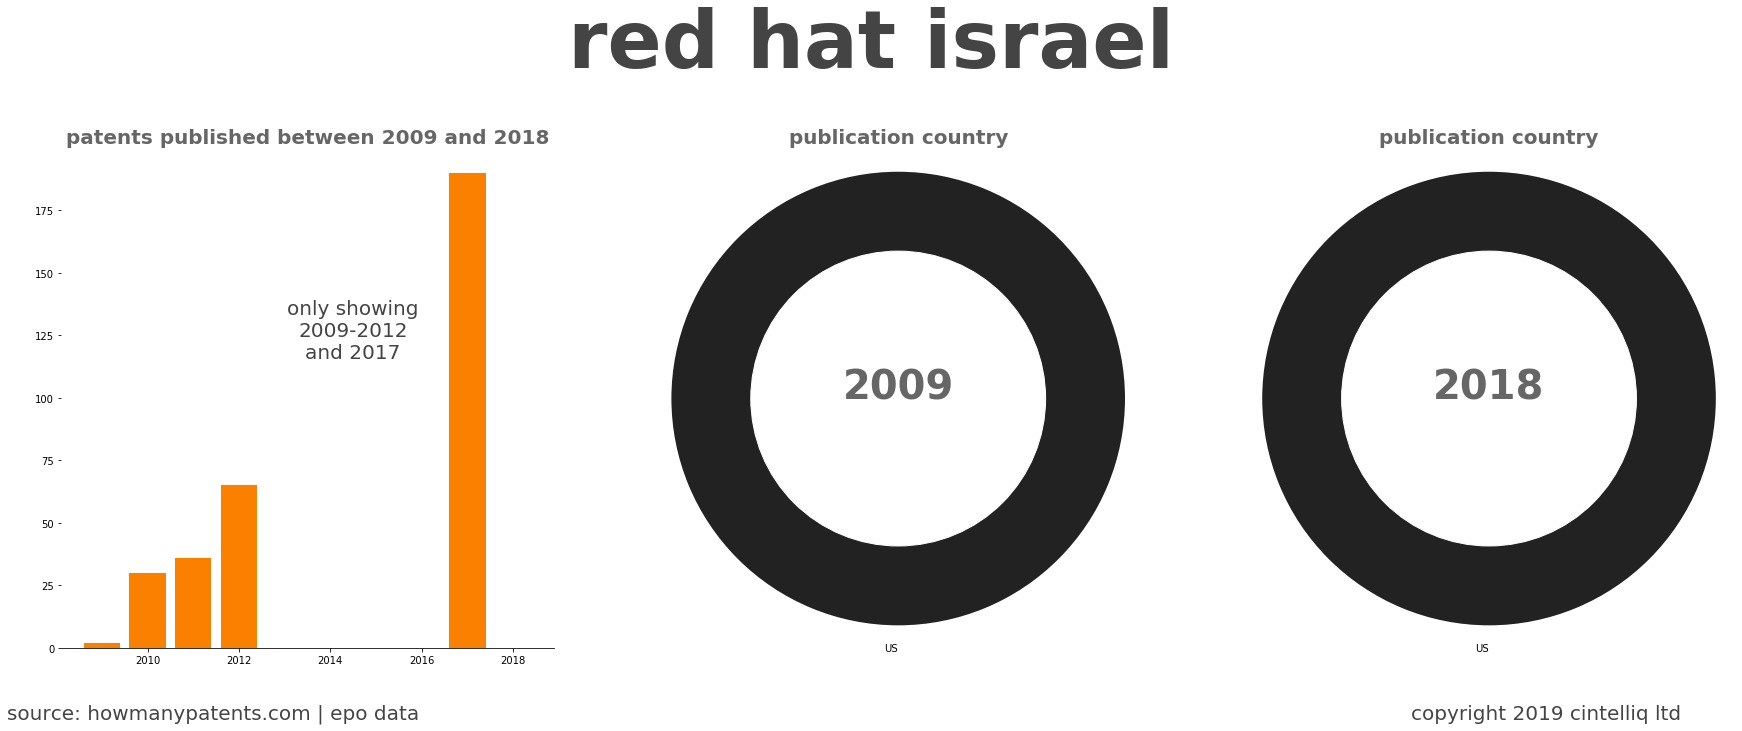 summary of patents for Red Hat Israel